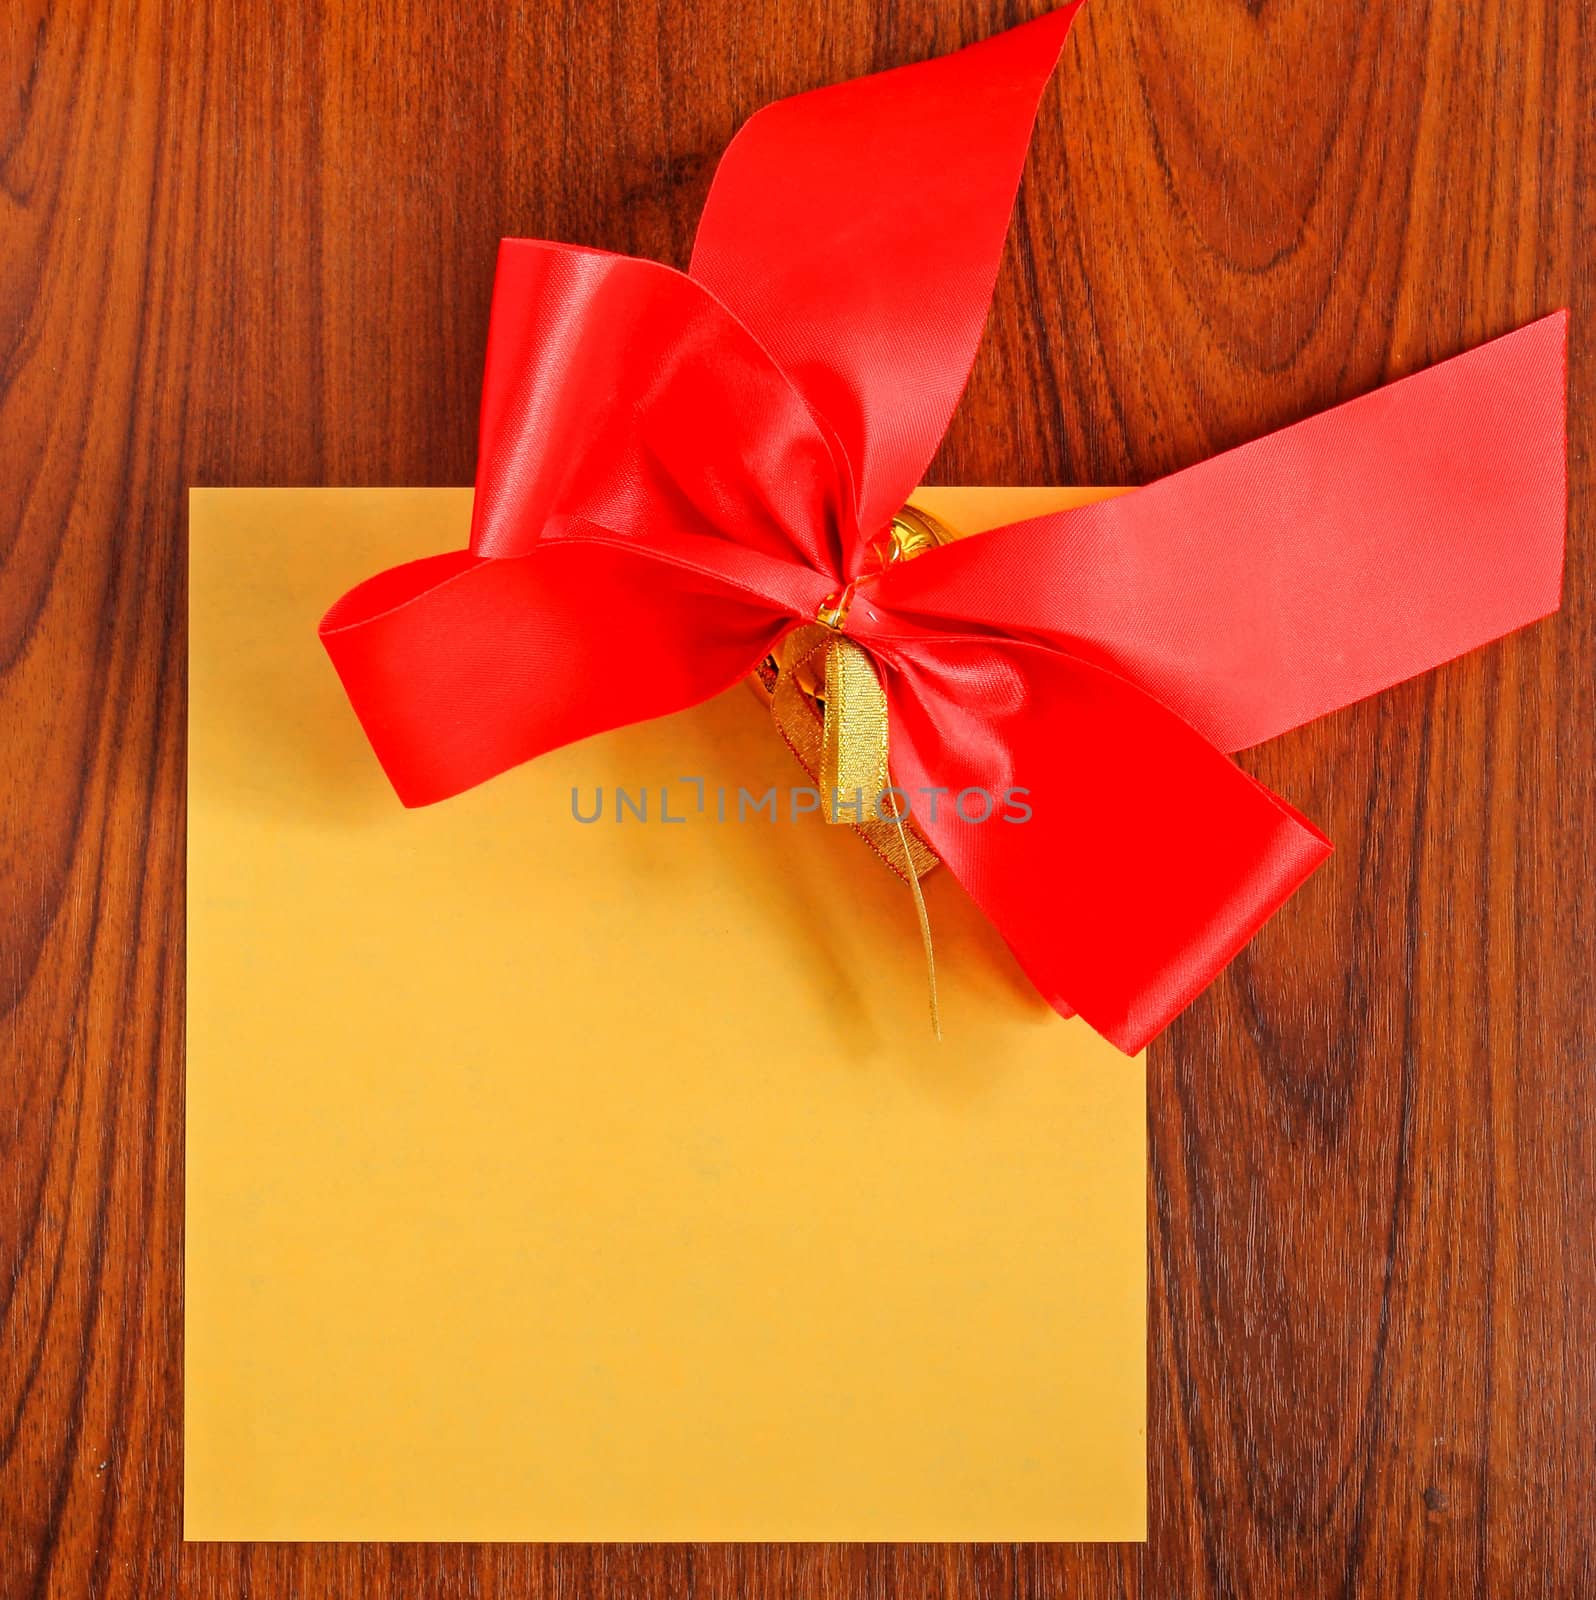 Notepaper with red bow on wooden background by nuchylee